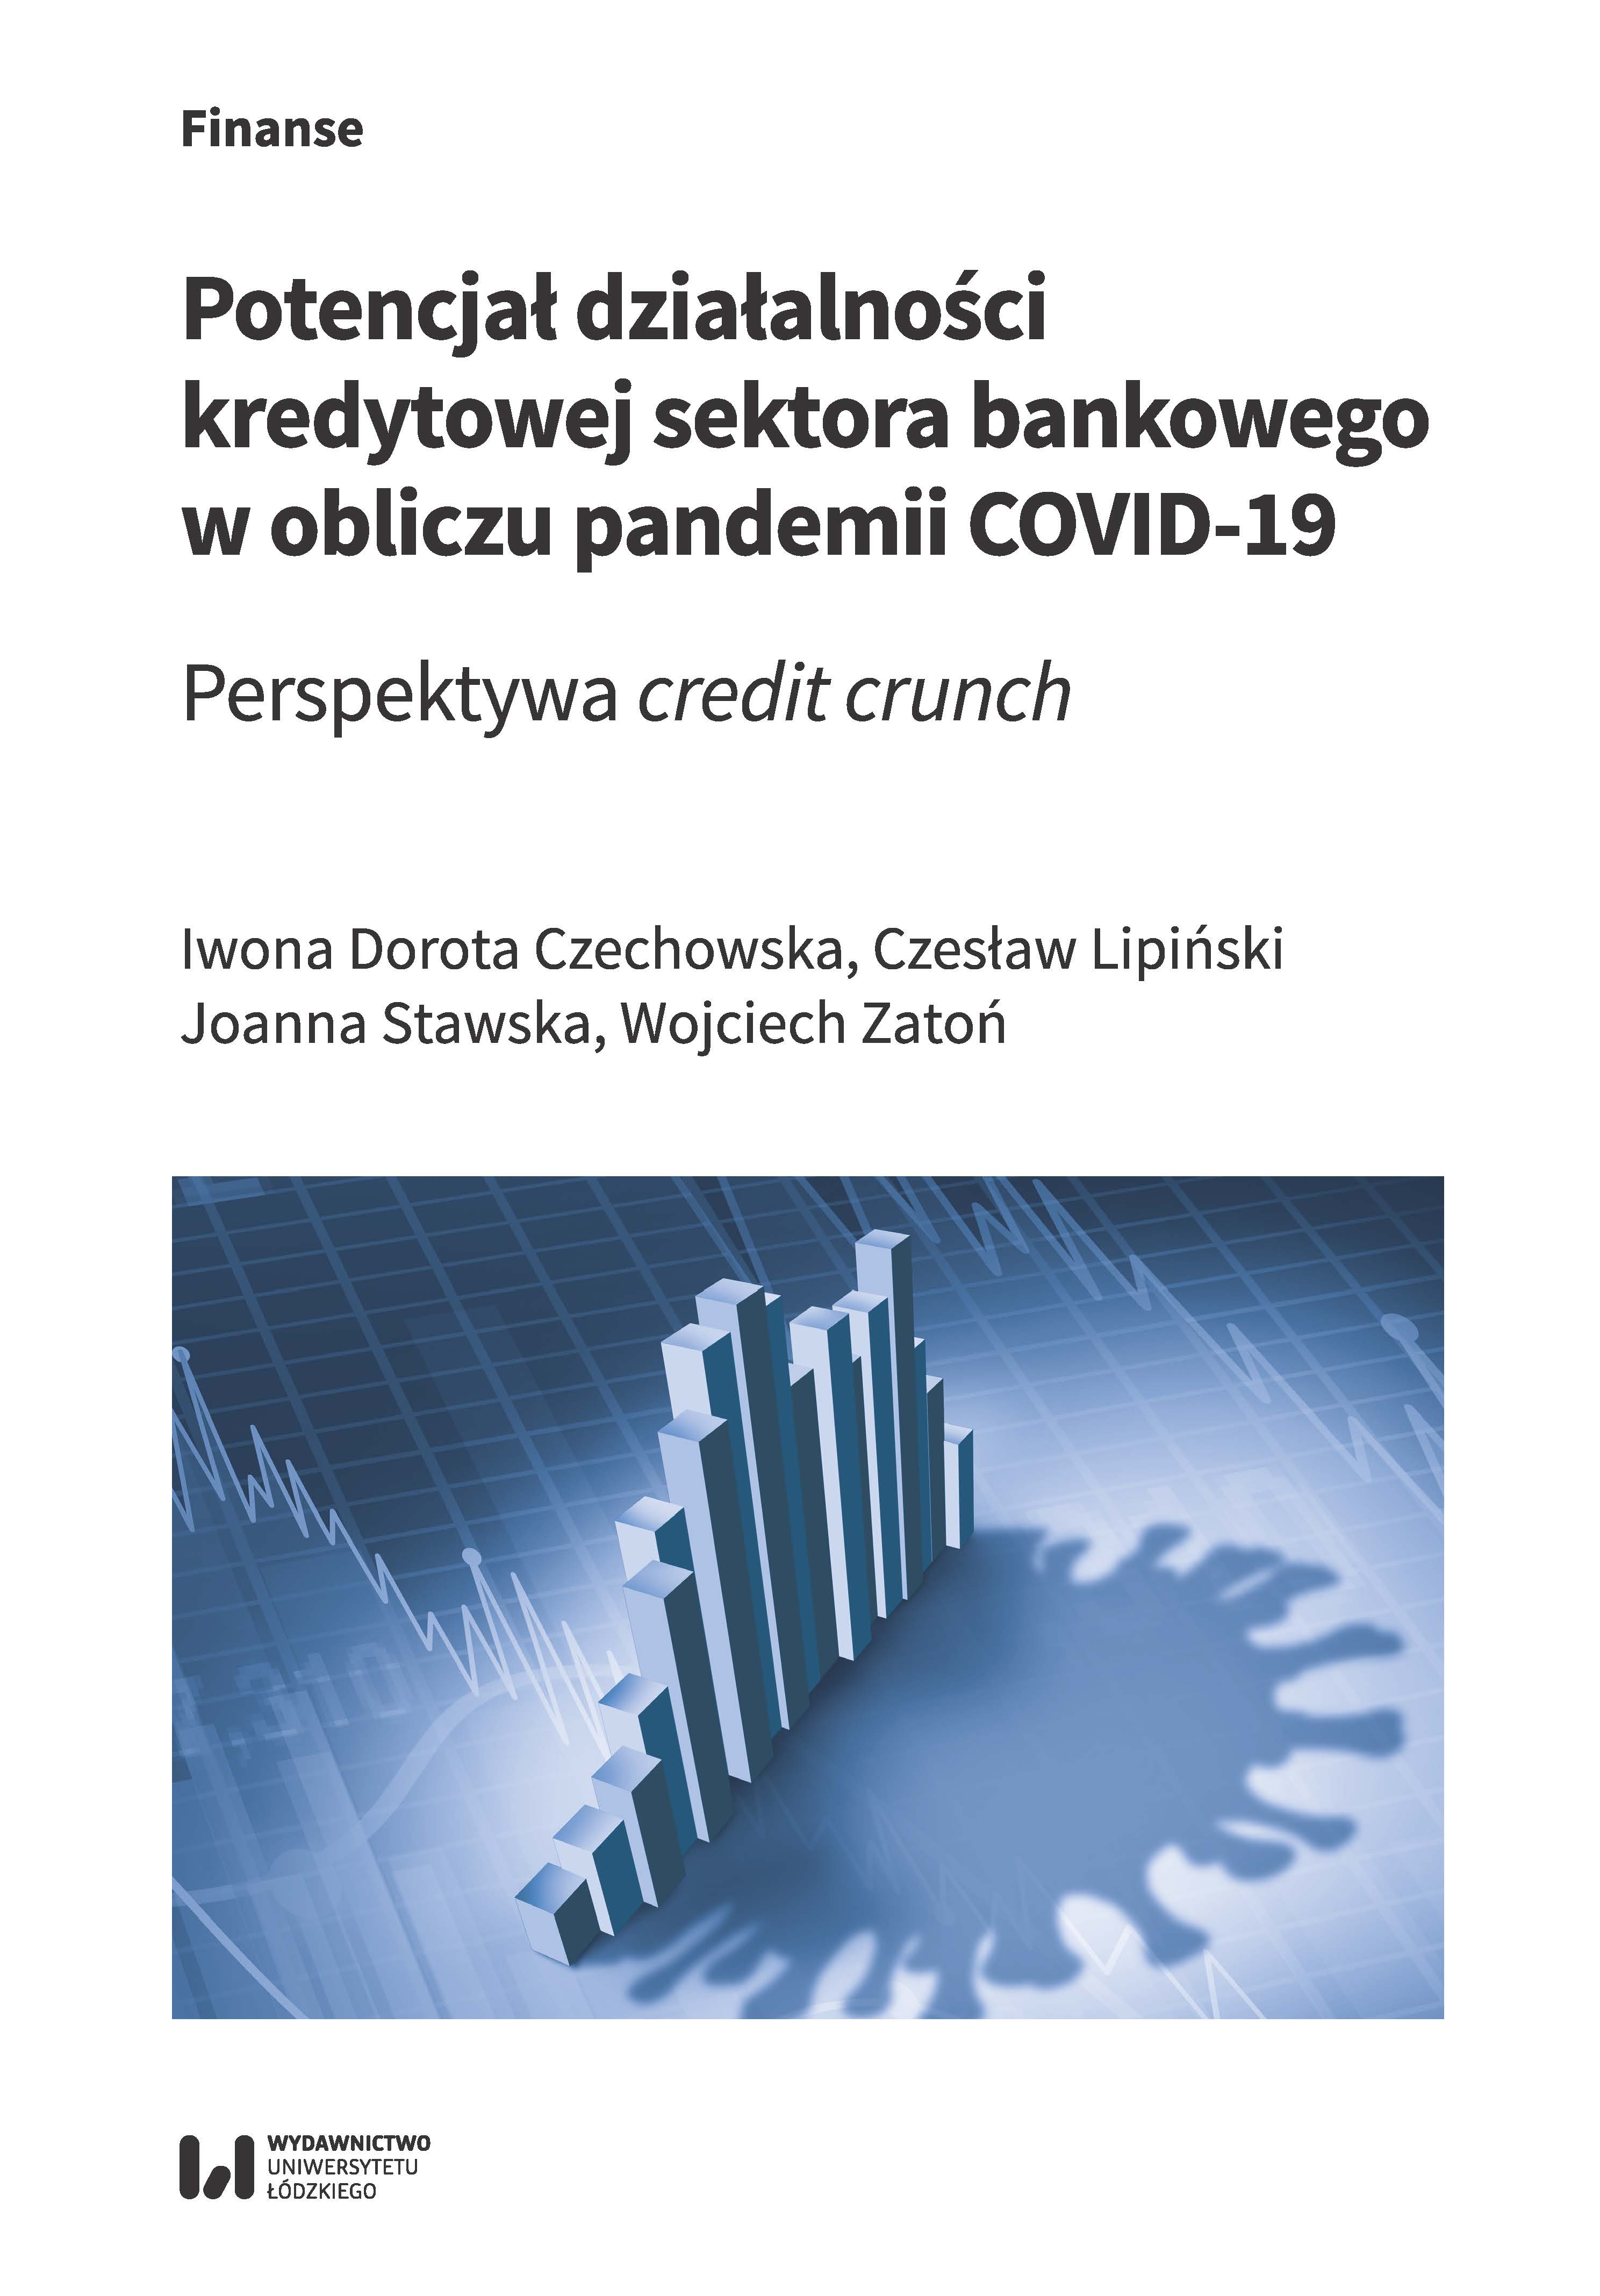 The Potential of the Banking Sector Lending in the Face of the COVID-19 Pandemic. Credit-crunch Perspective